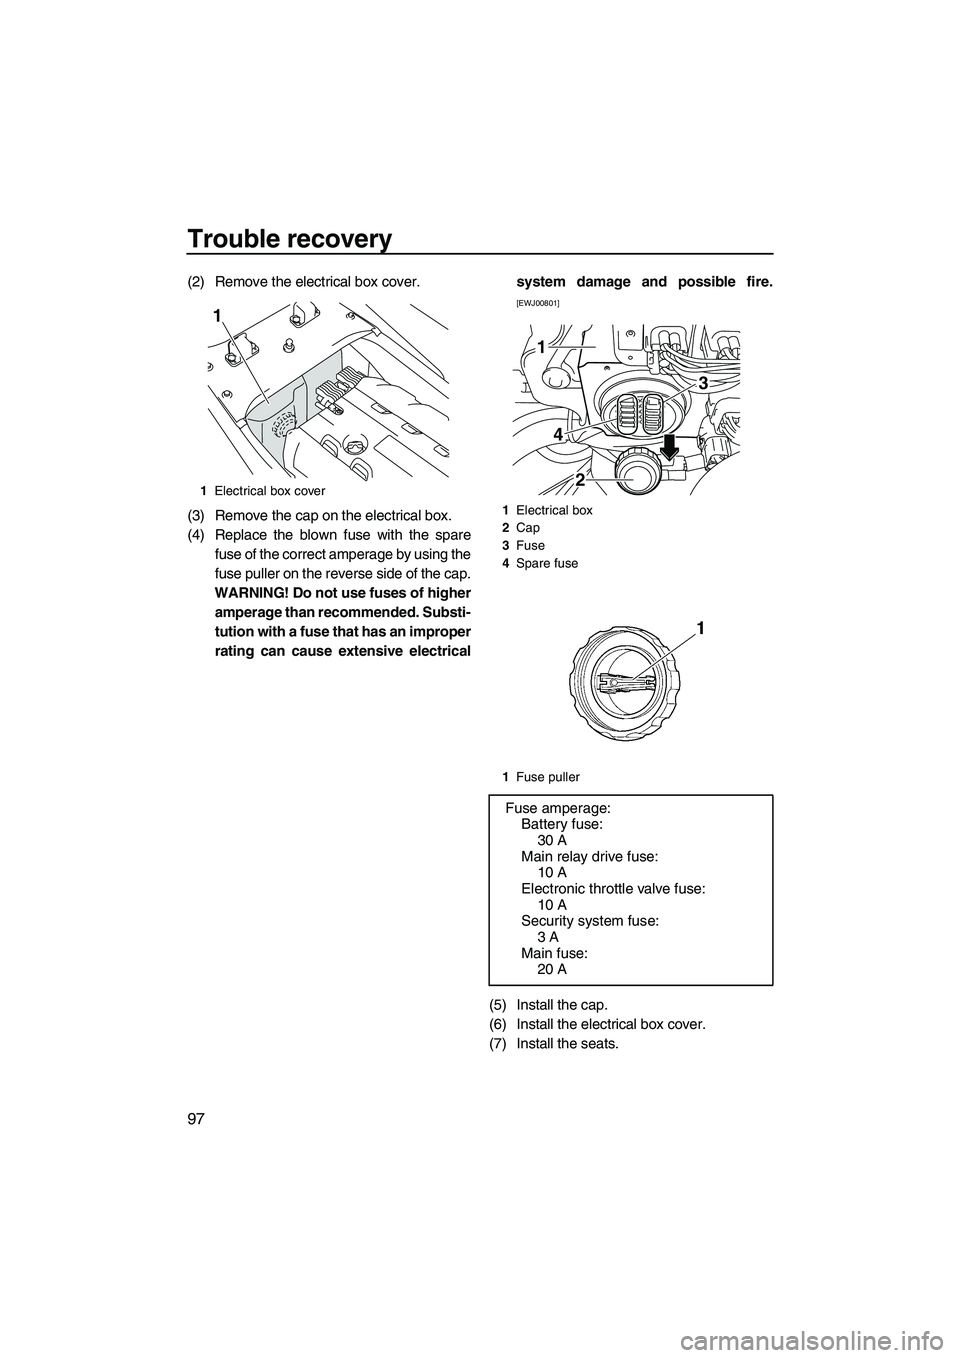 YAMAHA SVHO 2009  Owners Manual Trouble recovery
97
(2) Remove the electrical box cover.
(3) Remove the cap on the electrical box.
(4) Replace the blown fuse with the spare
fuse of the correct amperage by using the
fuse puller on th